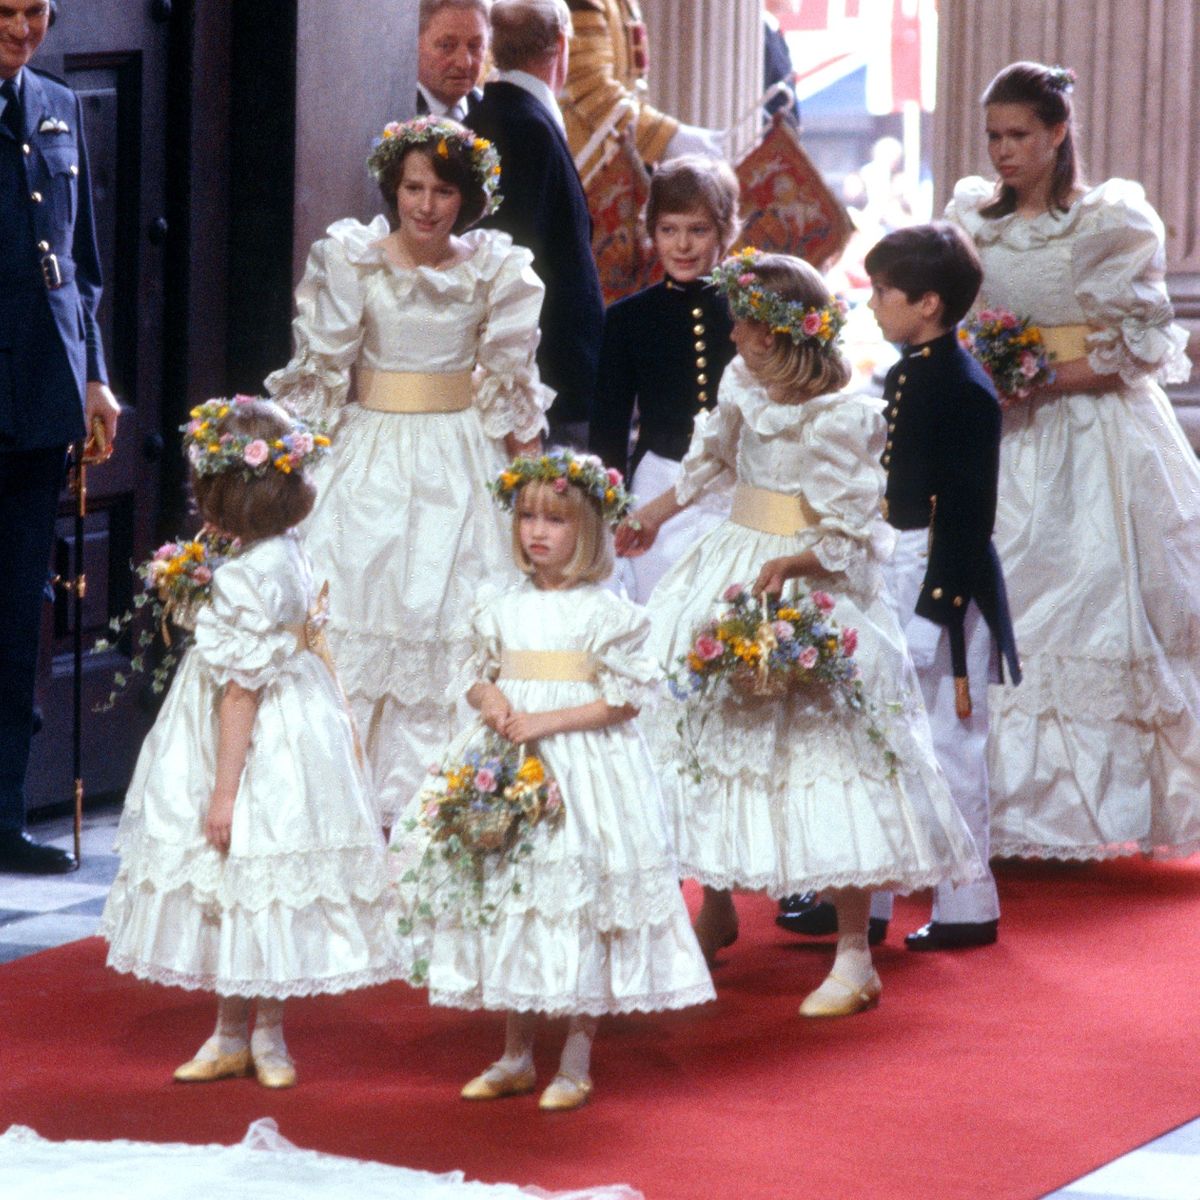 One of Princess Diana’s Bridesmaids Says She Was “Alarmed” by Her Dress ...